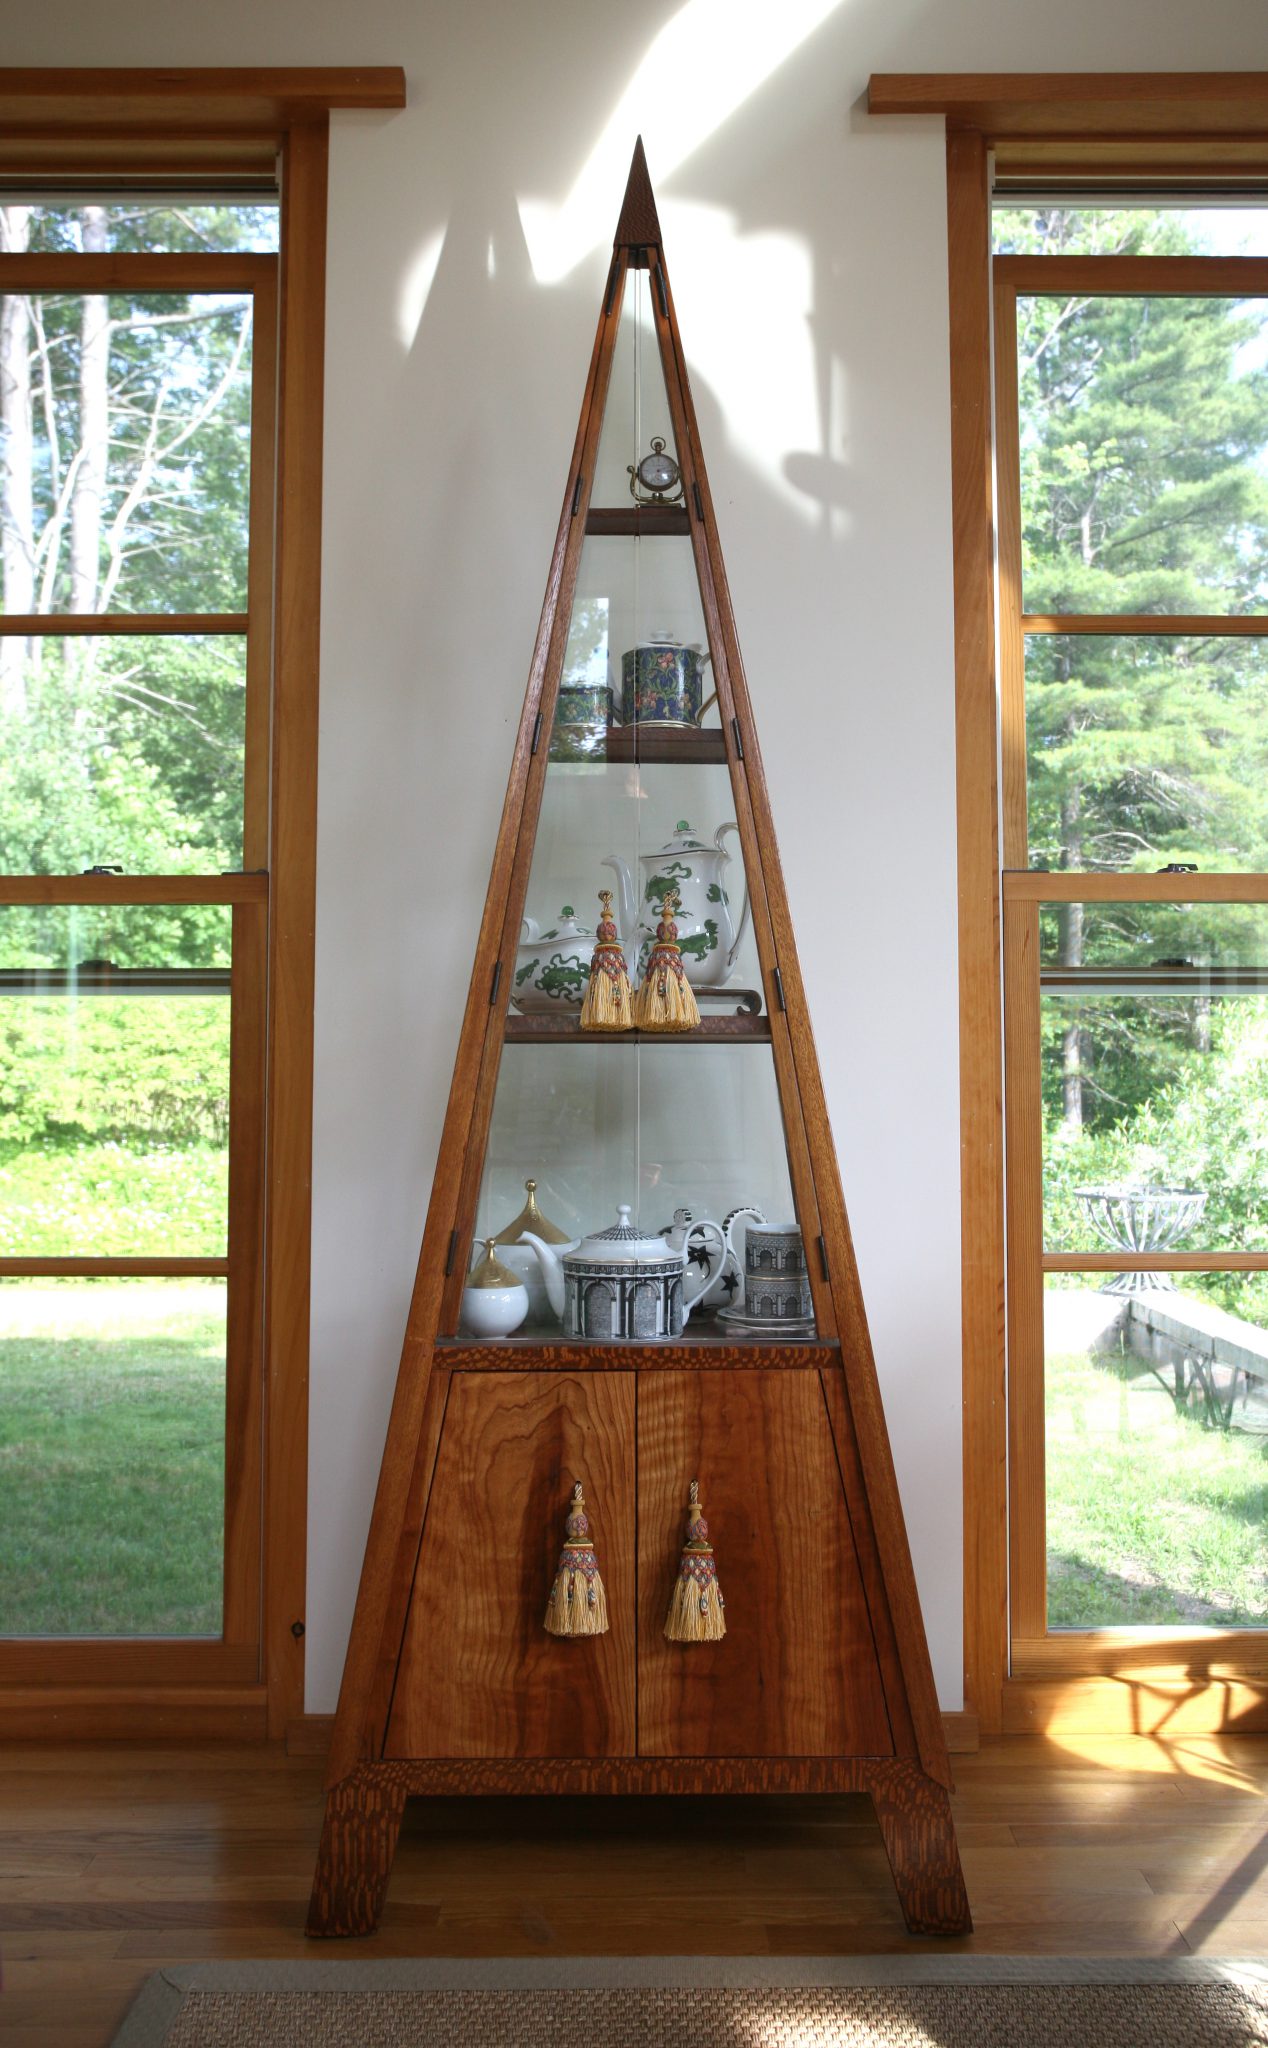 My Pyramidal Vitrine was built by Neil Ritter. I chose silk curtain tassels to use for the door-pulls.